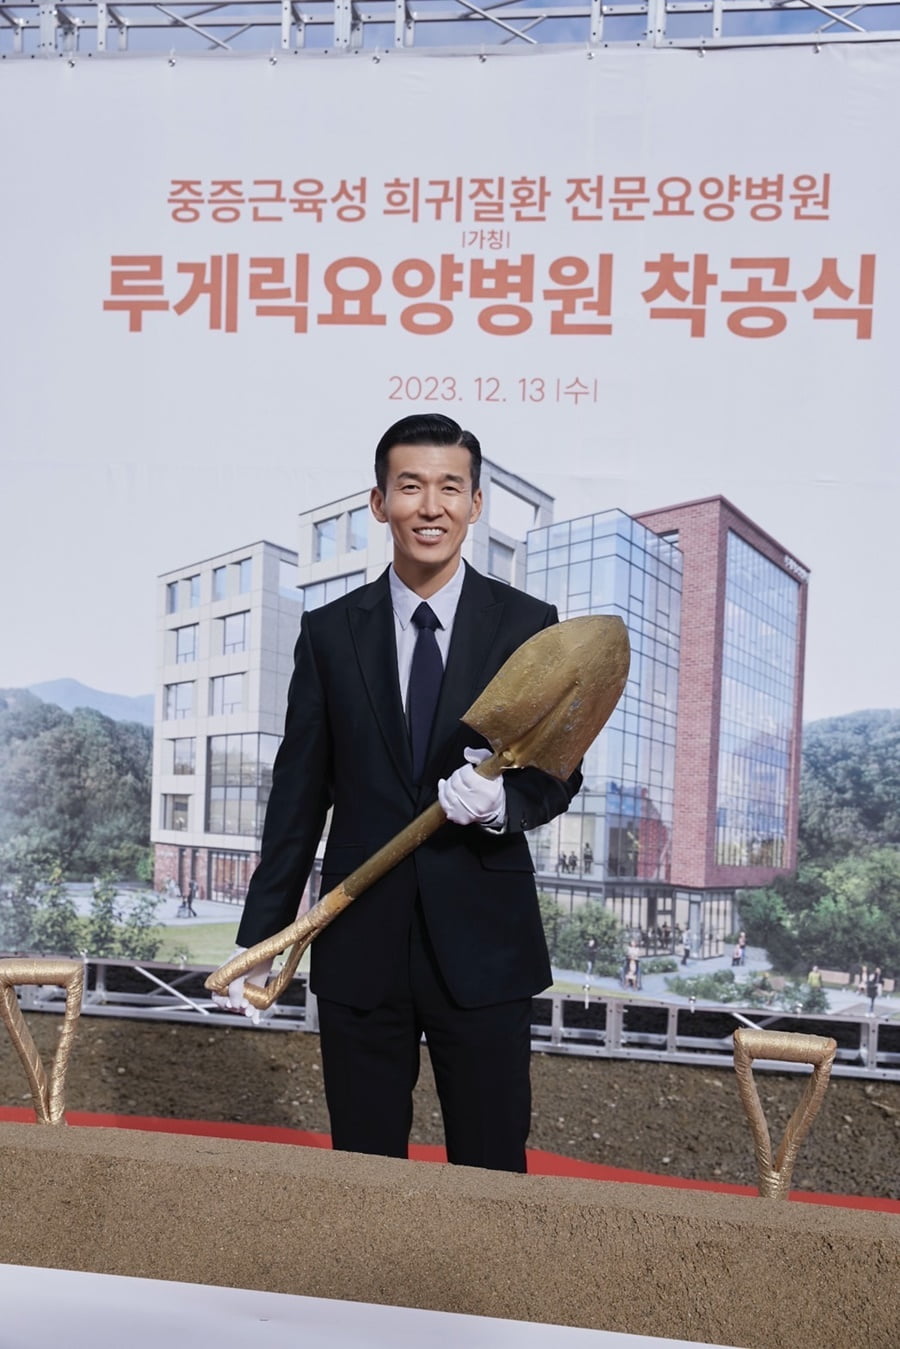 Sean, who donated 5.7 billion won, finally did it! Korea's first Lou Gehrig nursing hospital in 14 years, 'first step'